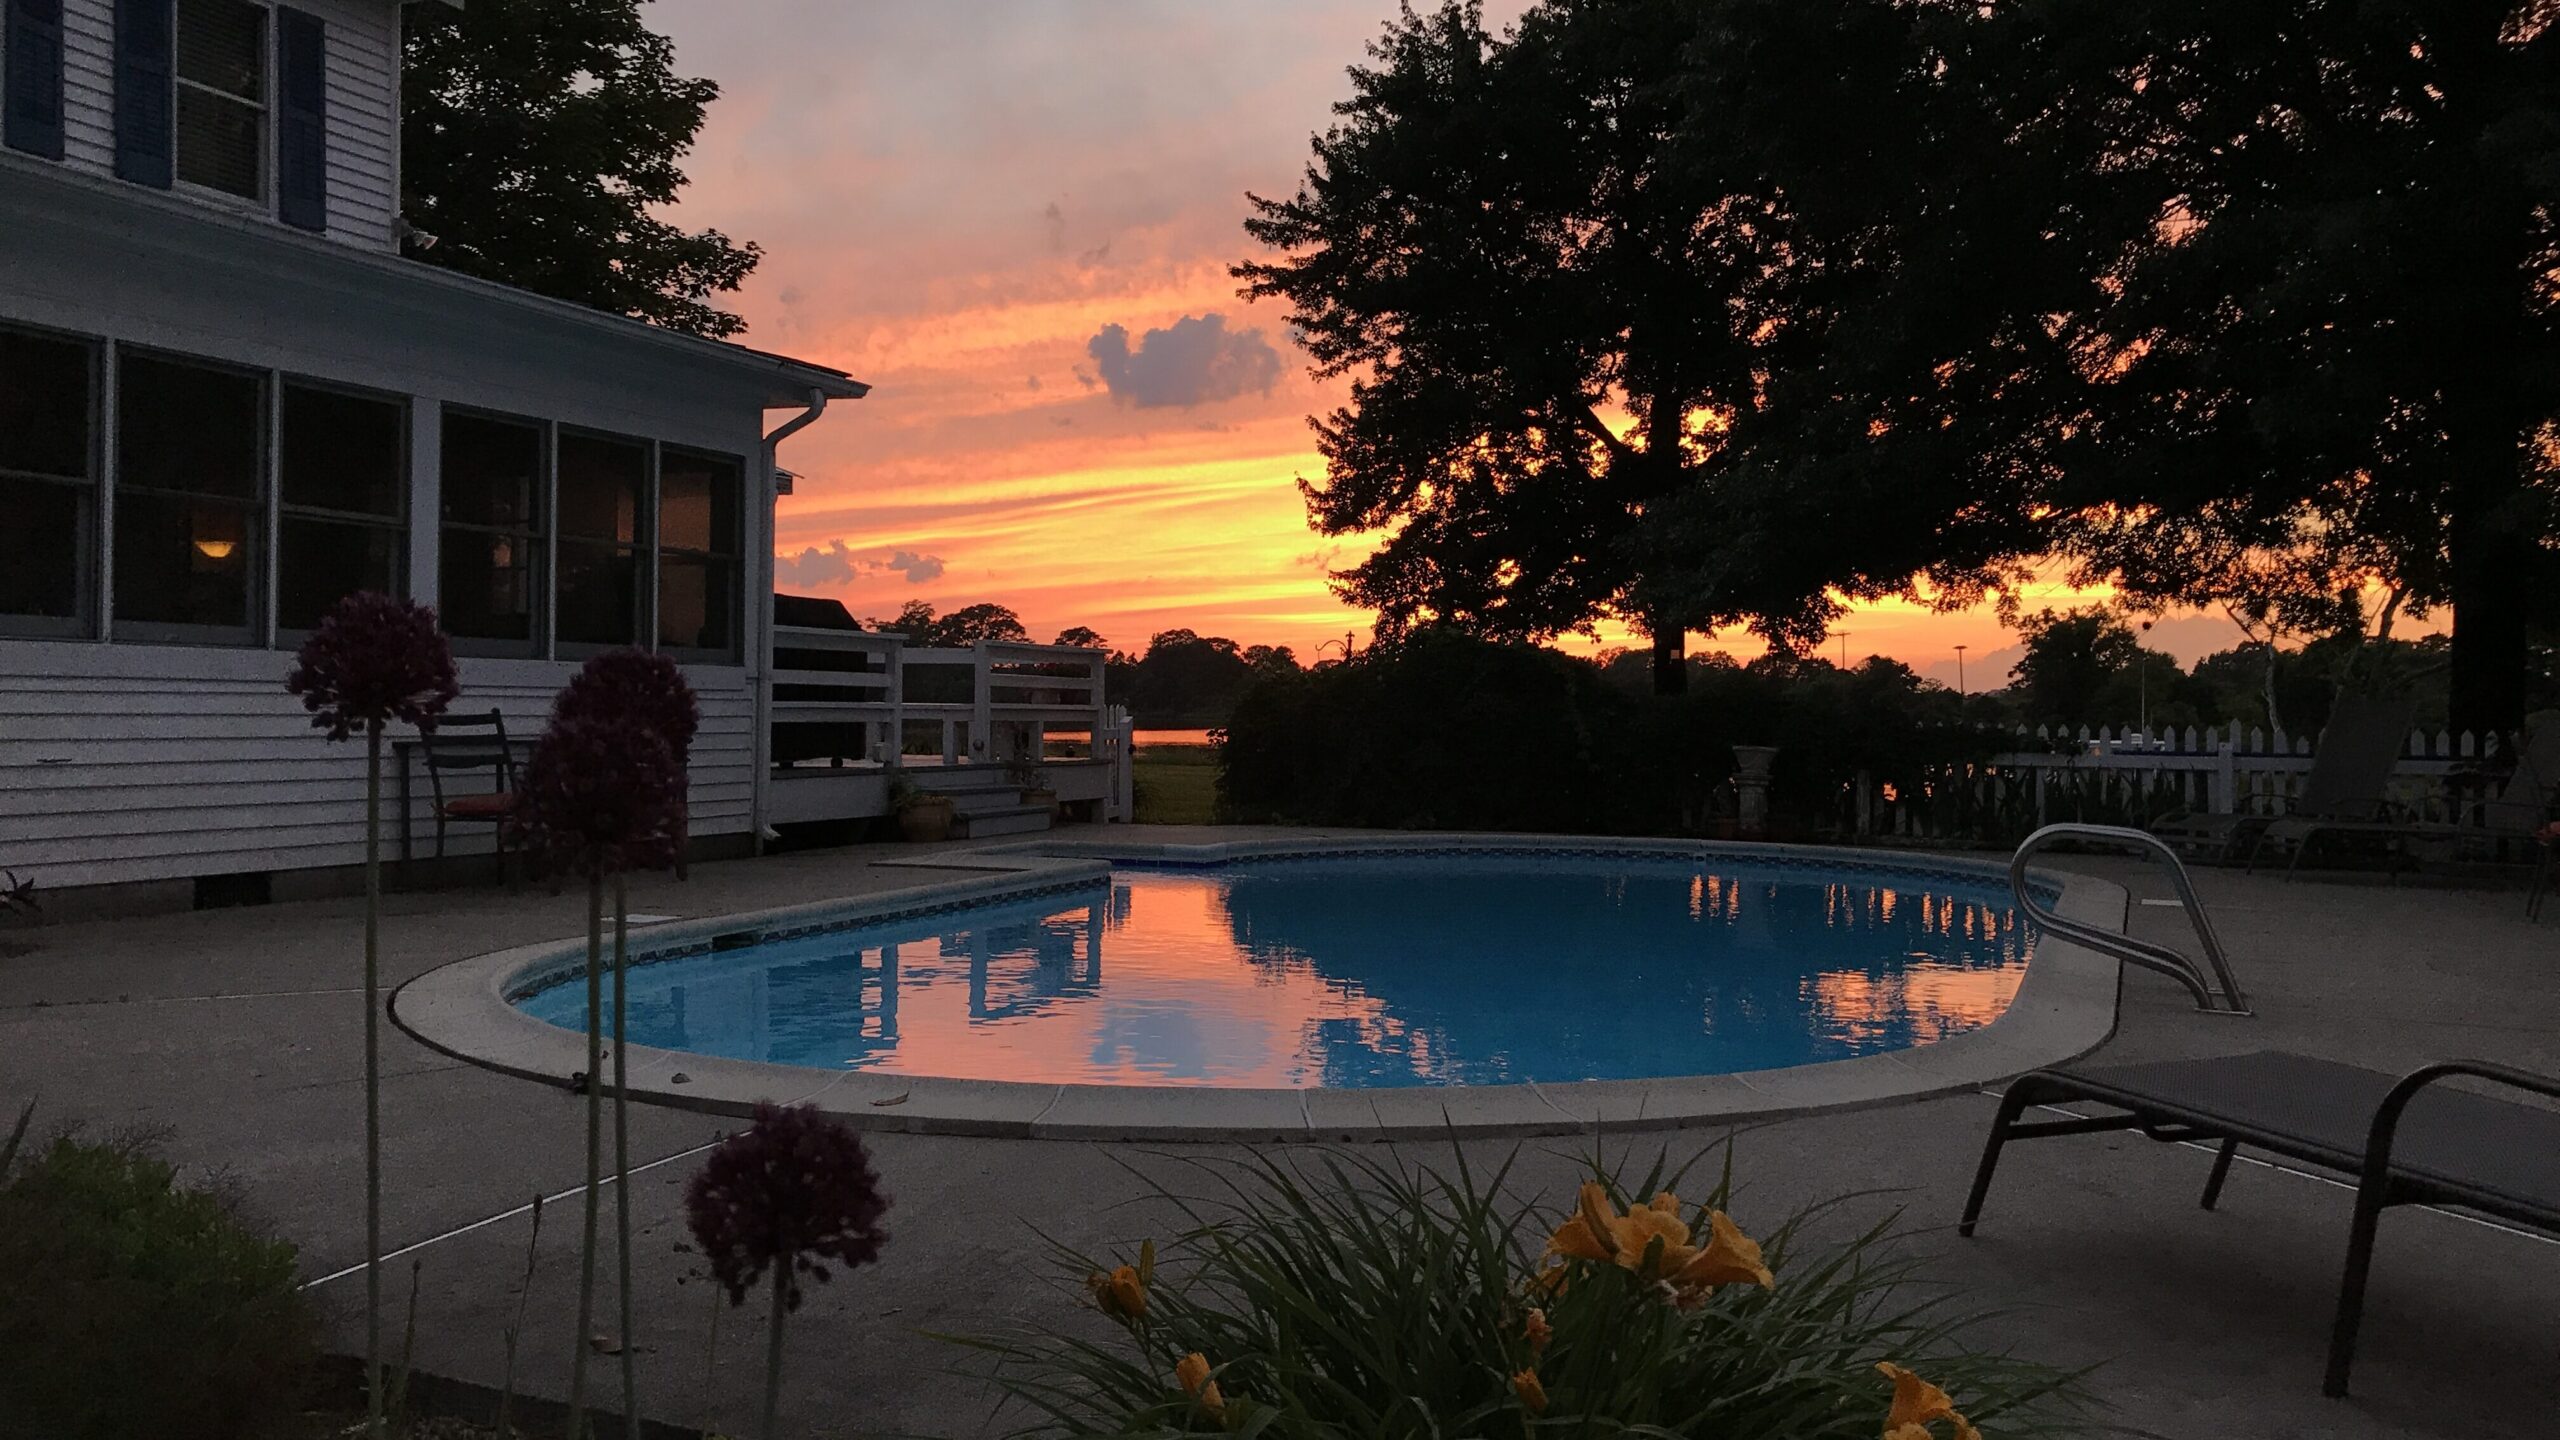 sunset over the pool